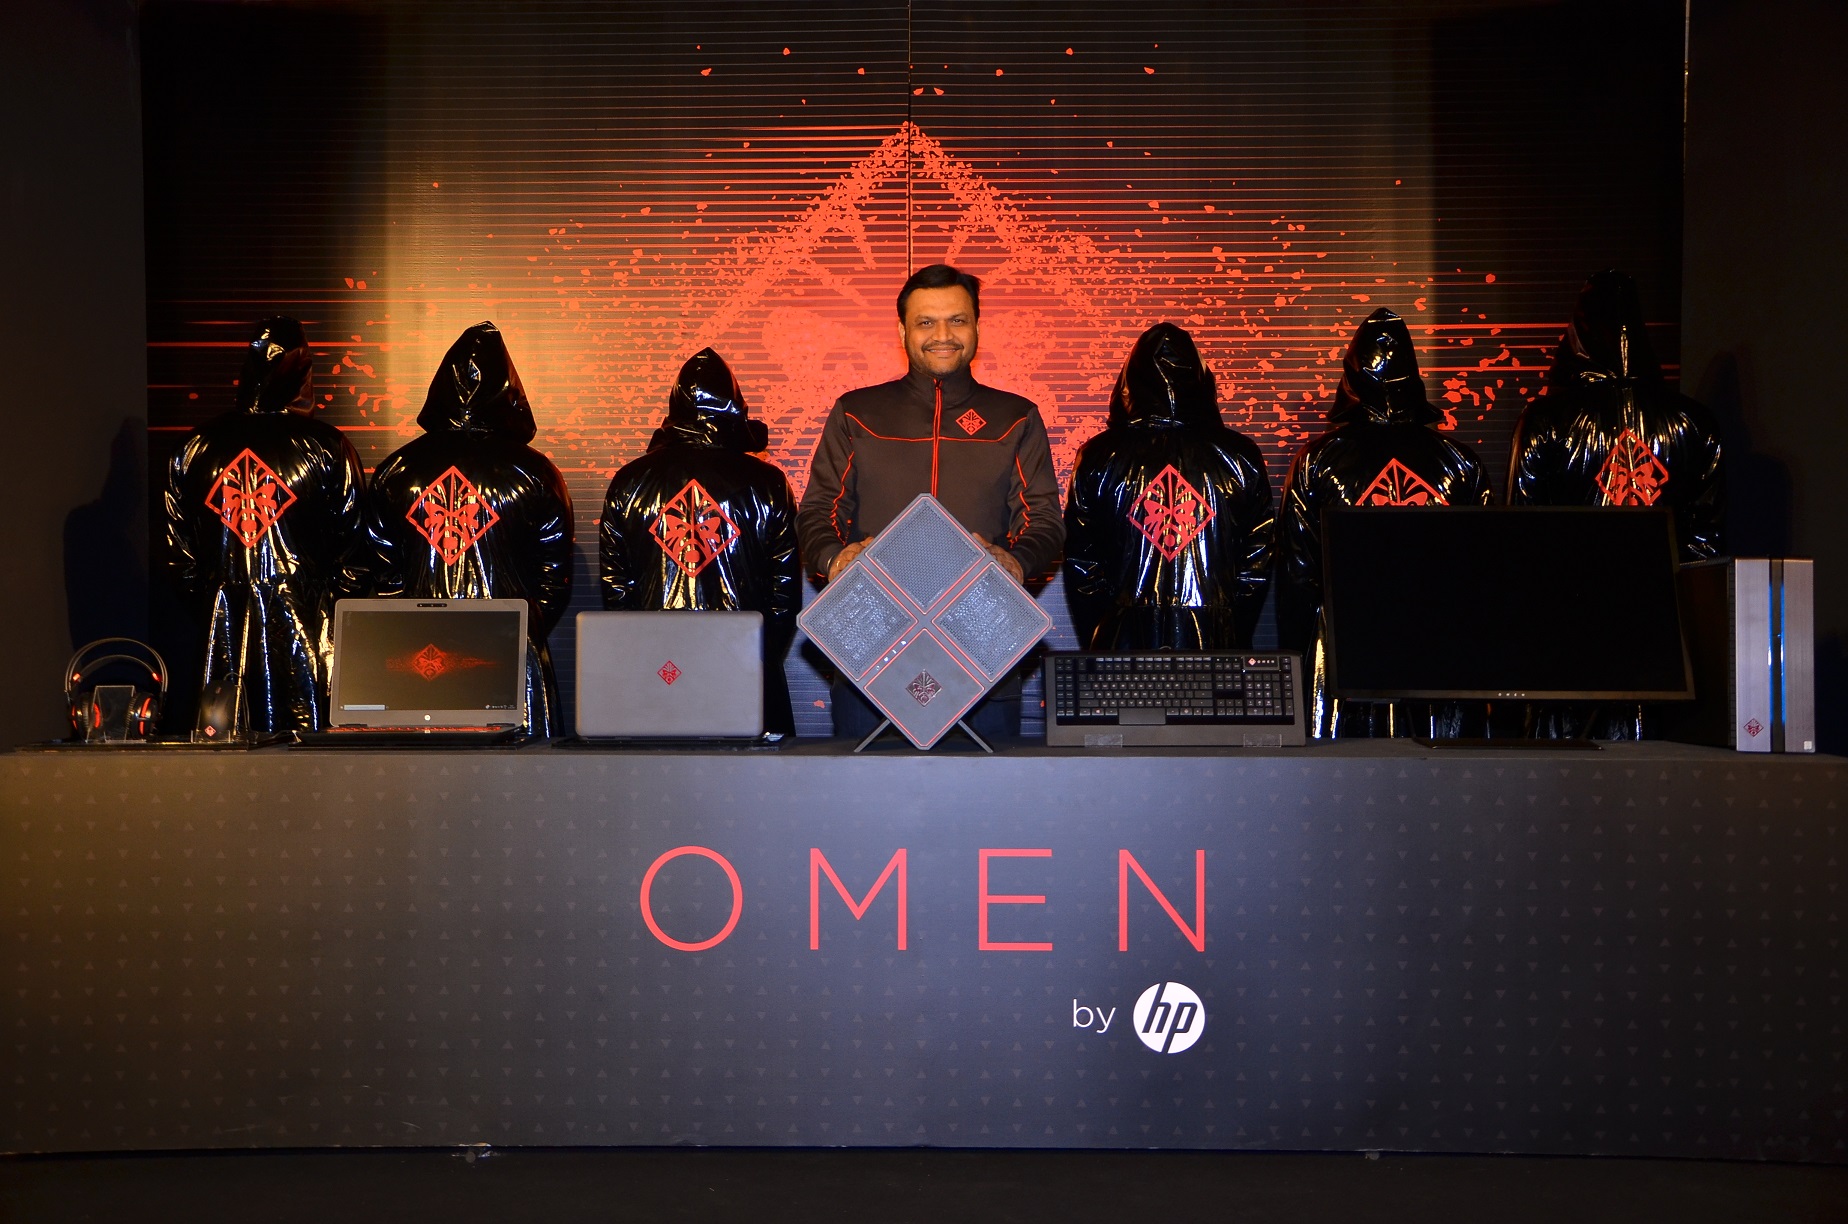 HP Omen Gaming Laptops, Desktops and Accessories launched in India